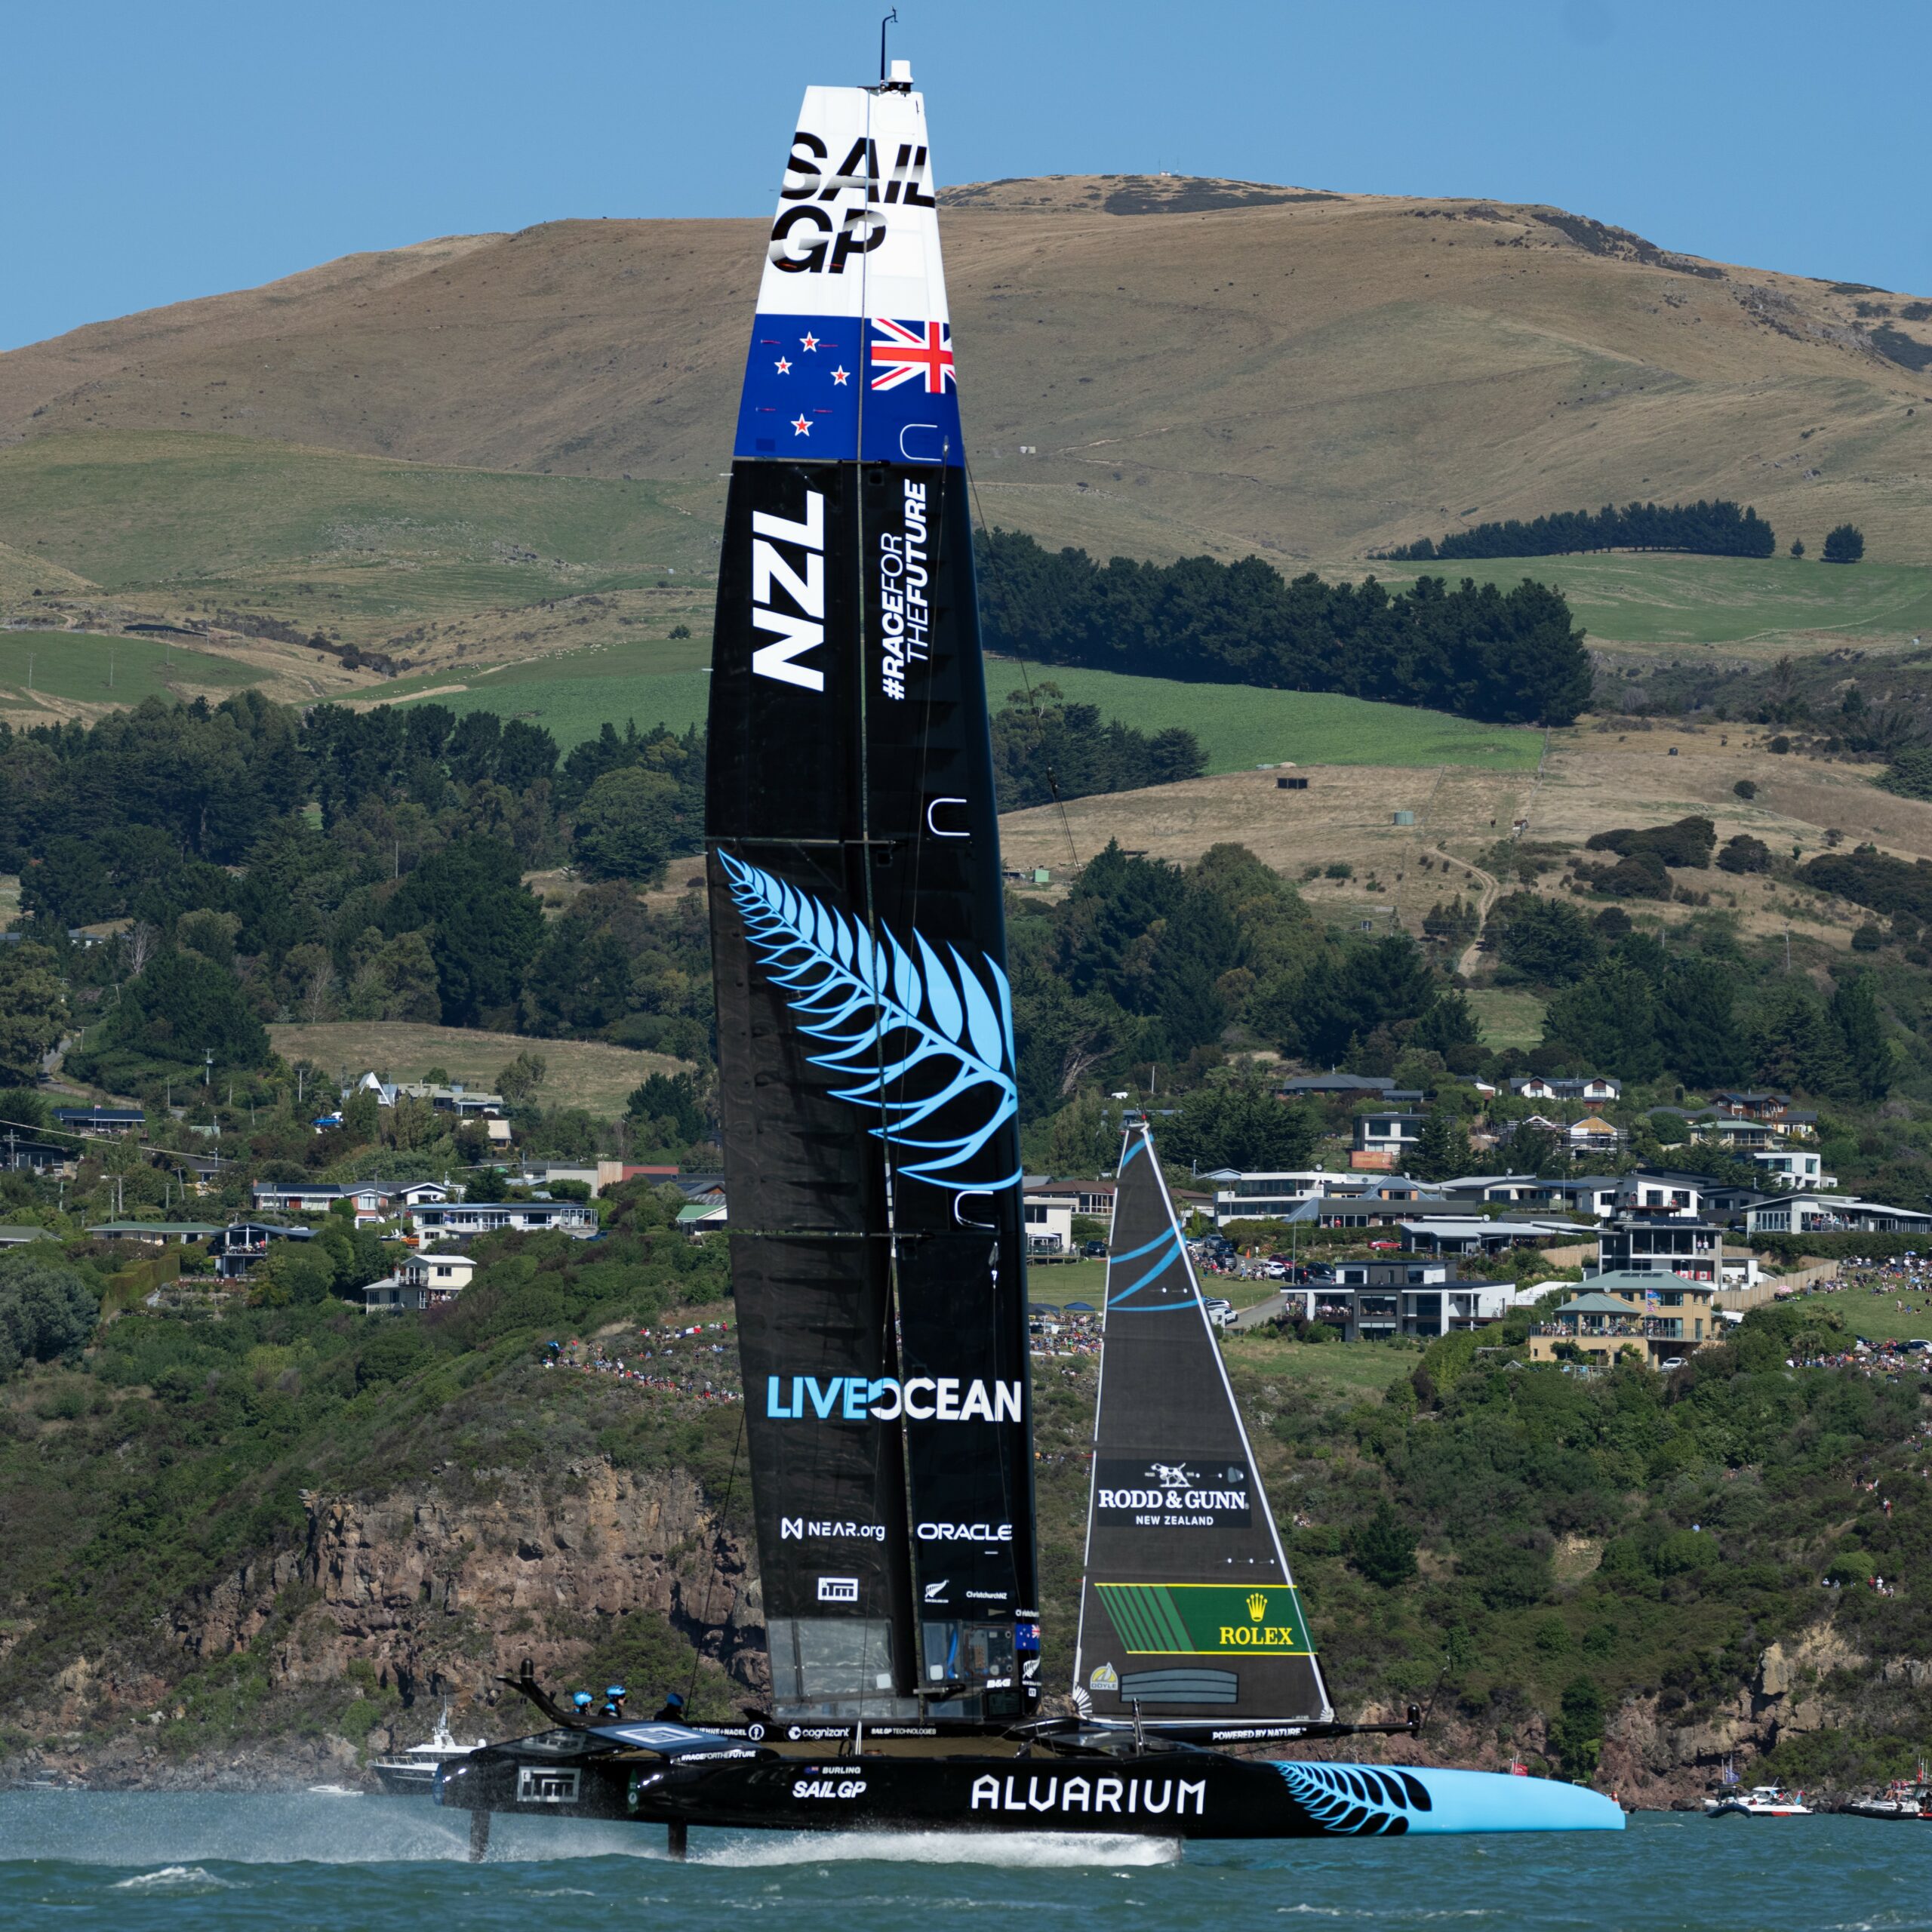 New Zealand SailGP Team helmed by Peter Burling in action on Race Day 2 of the ITM New Zealand Sail Grand Prix in Christchurch, New Zealand. Sunday 19th March 2023. Photo: Bob Martin for SailGP. Handout image supplied by SailGP